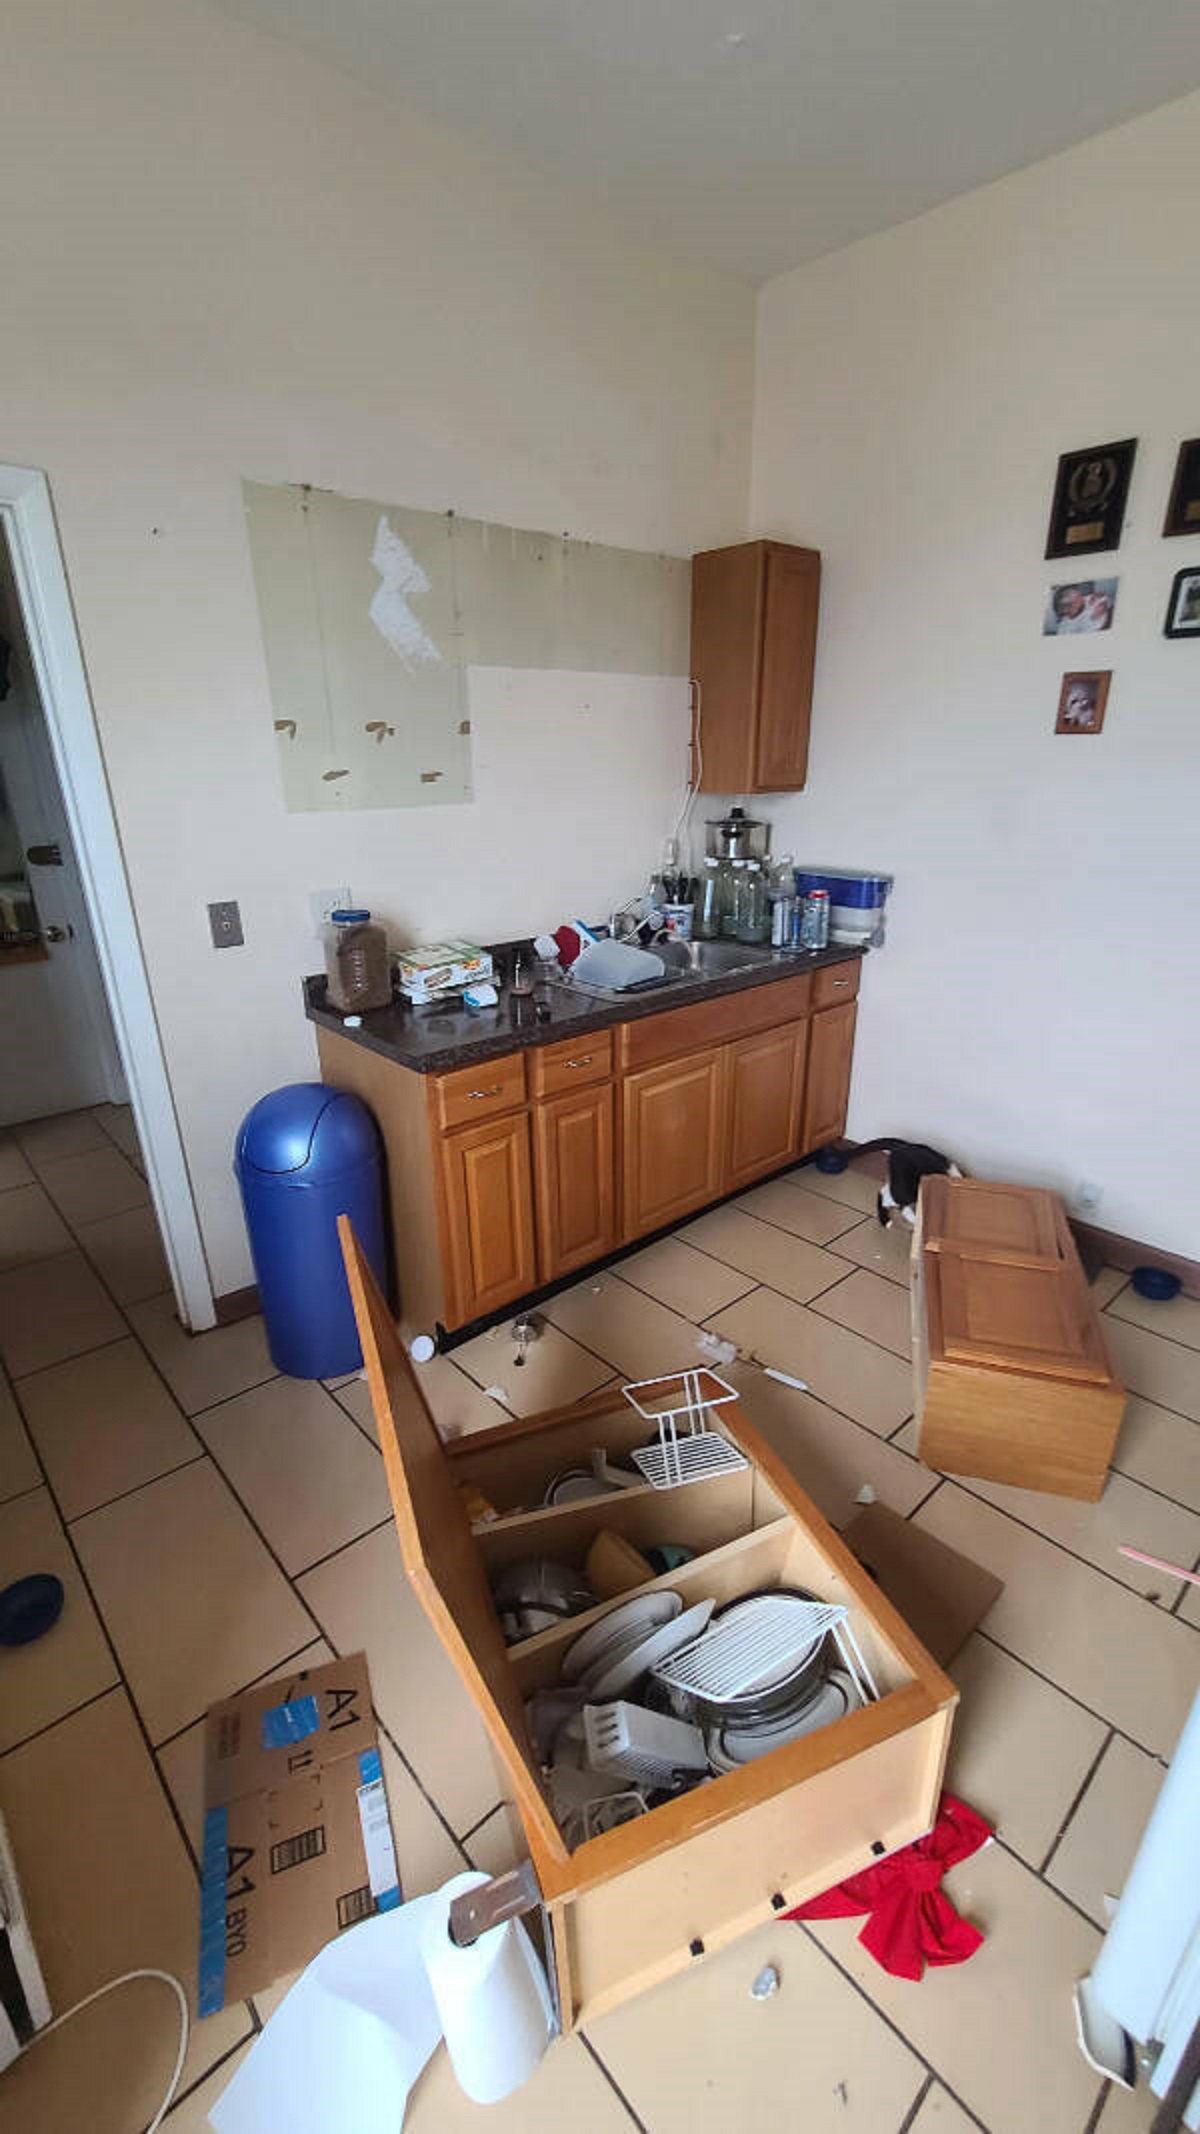 “Kitchen cabinets came crashing down at 4am last night.”